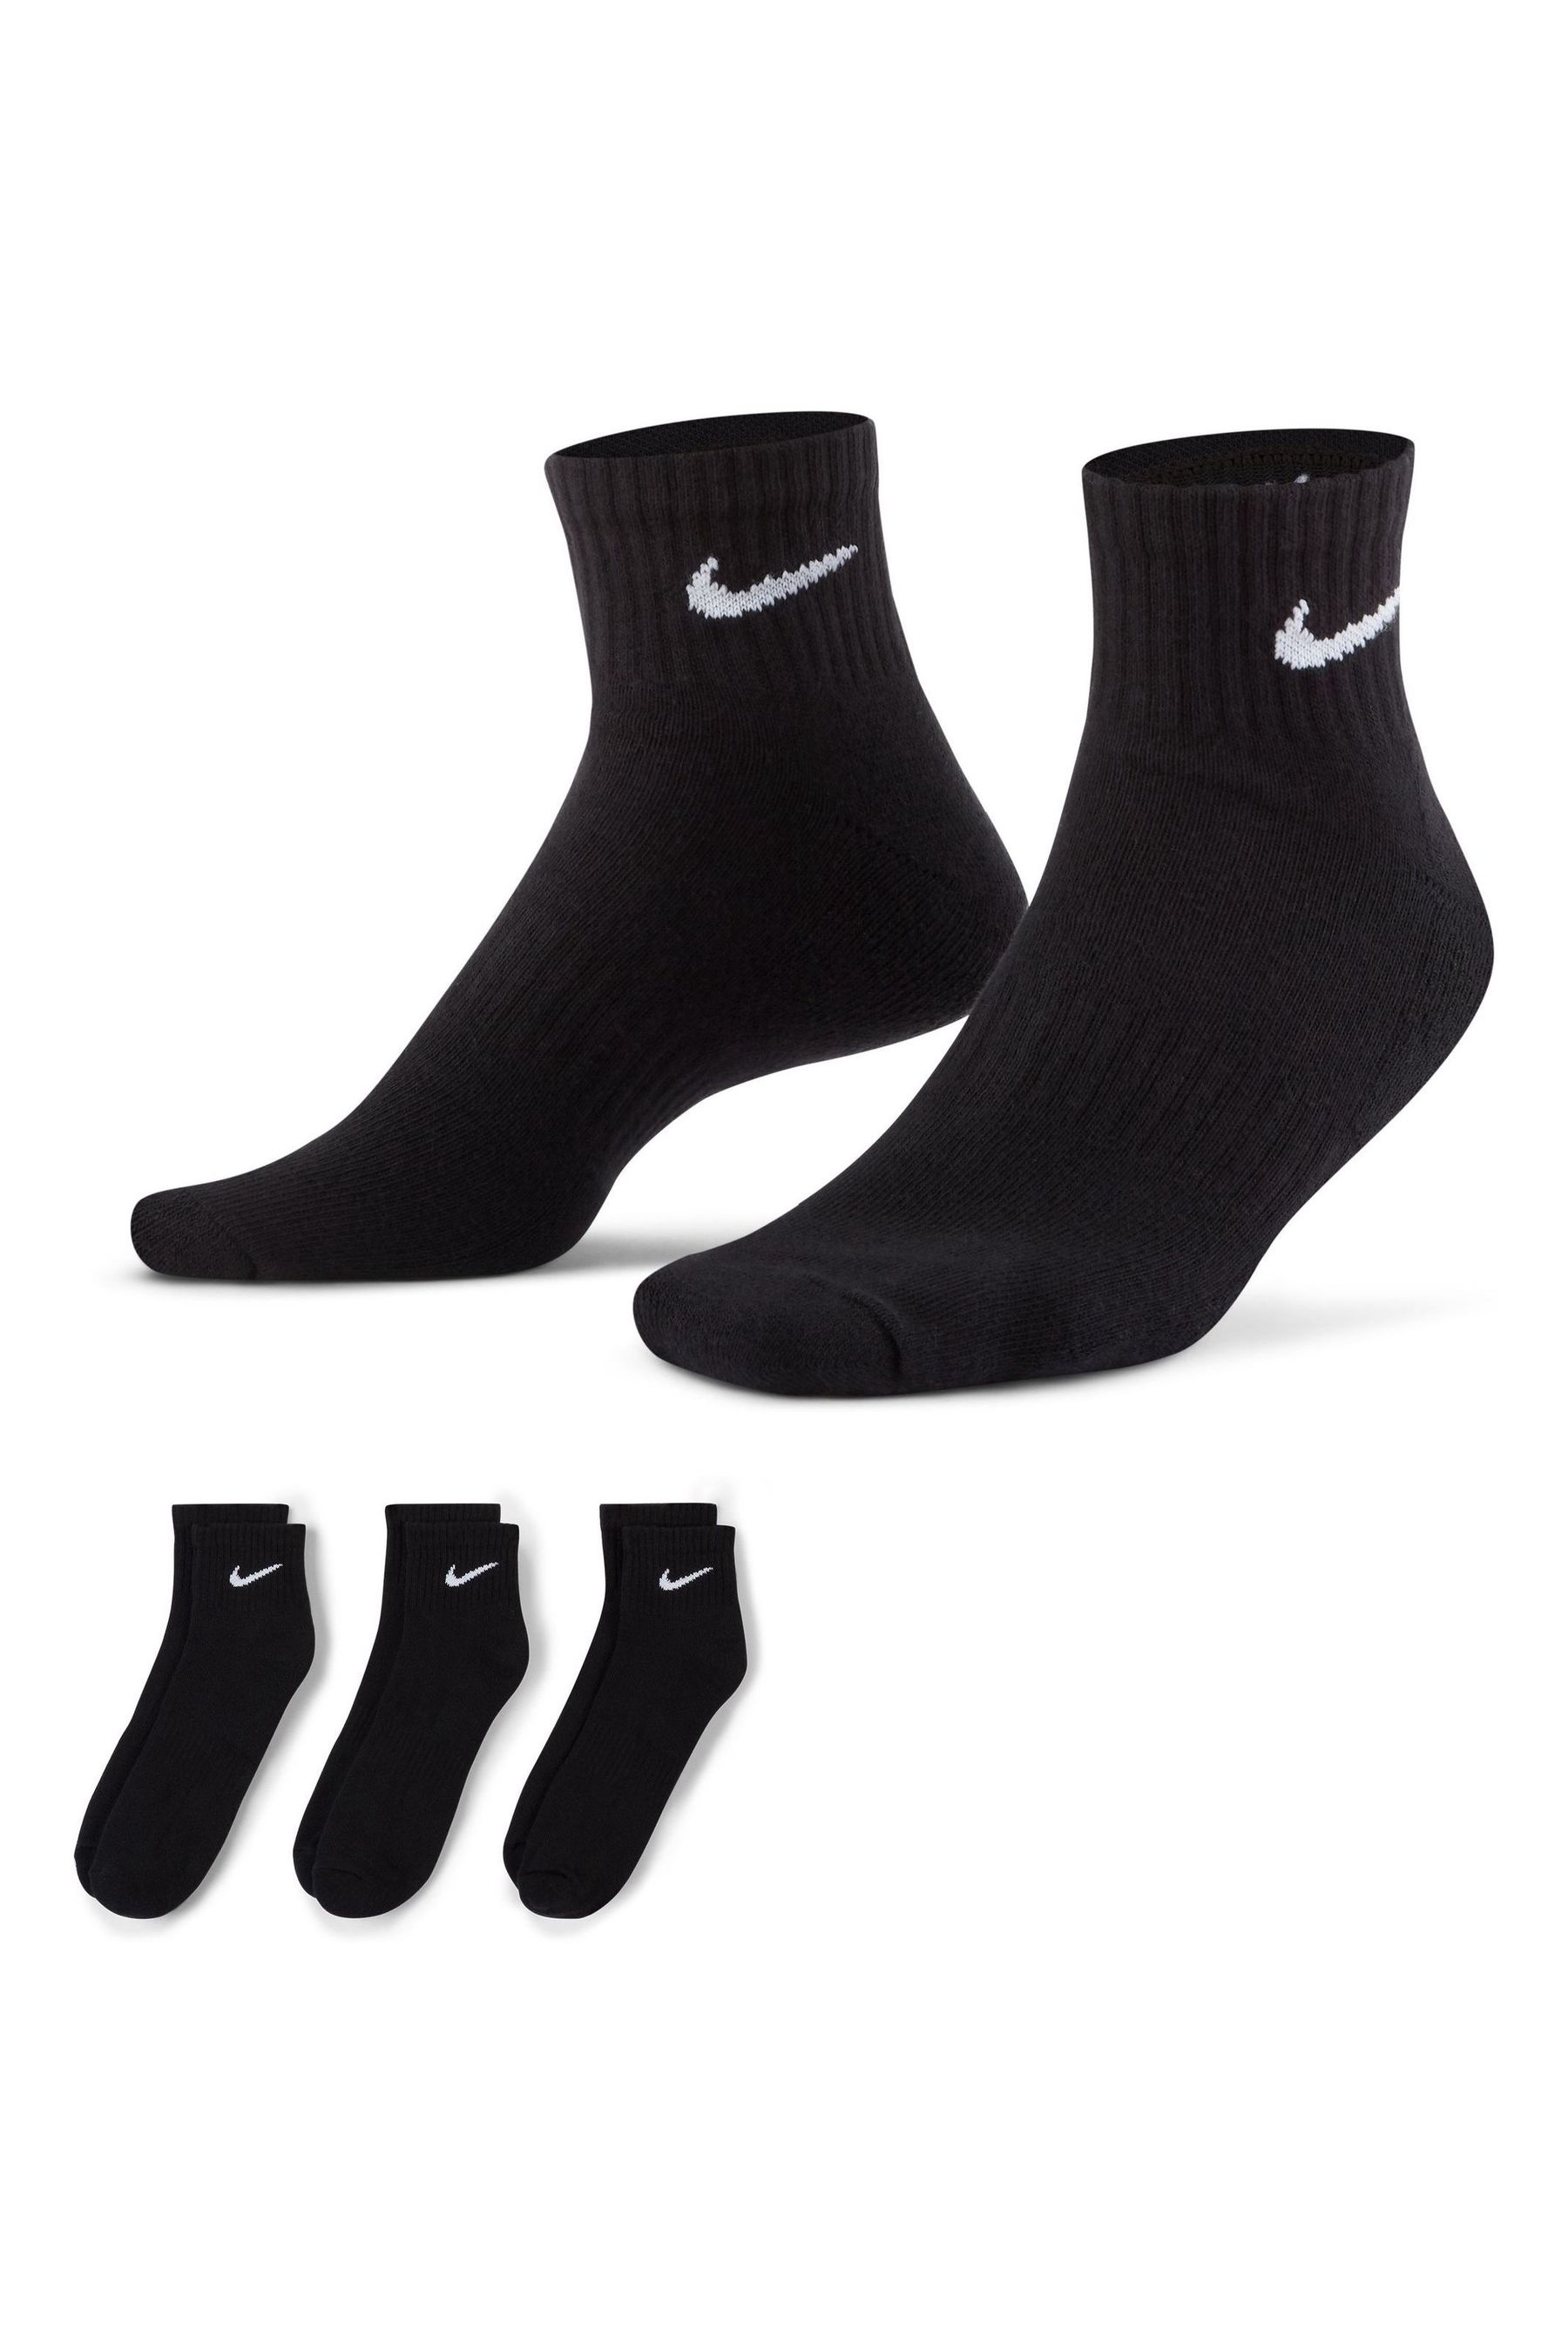 Buy Nike Lightweight Cushioned Ankle Socks 3pk from the Next UK online shop